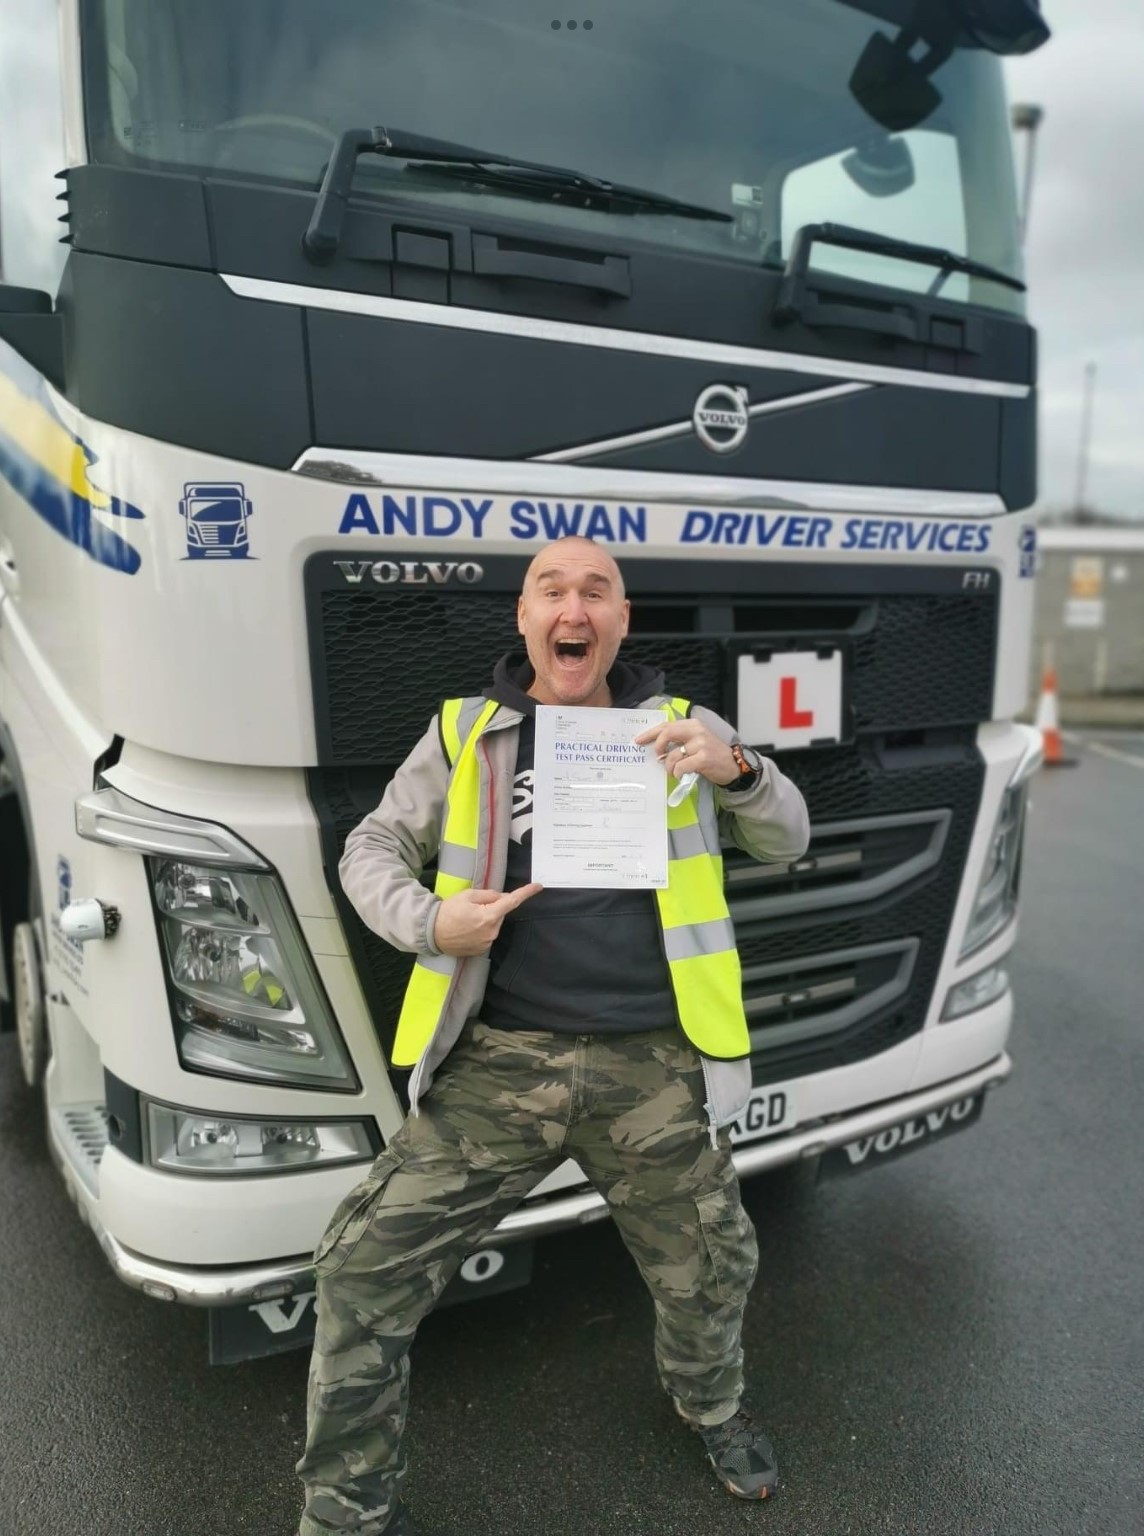 image of pupil passing hgv training course